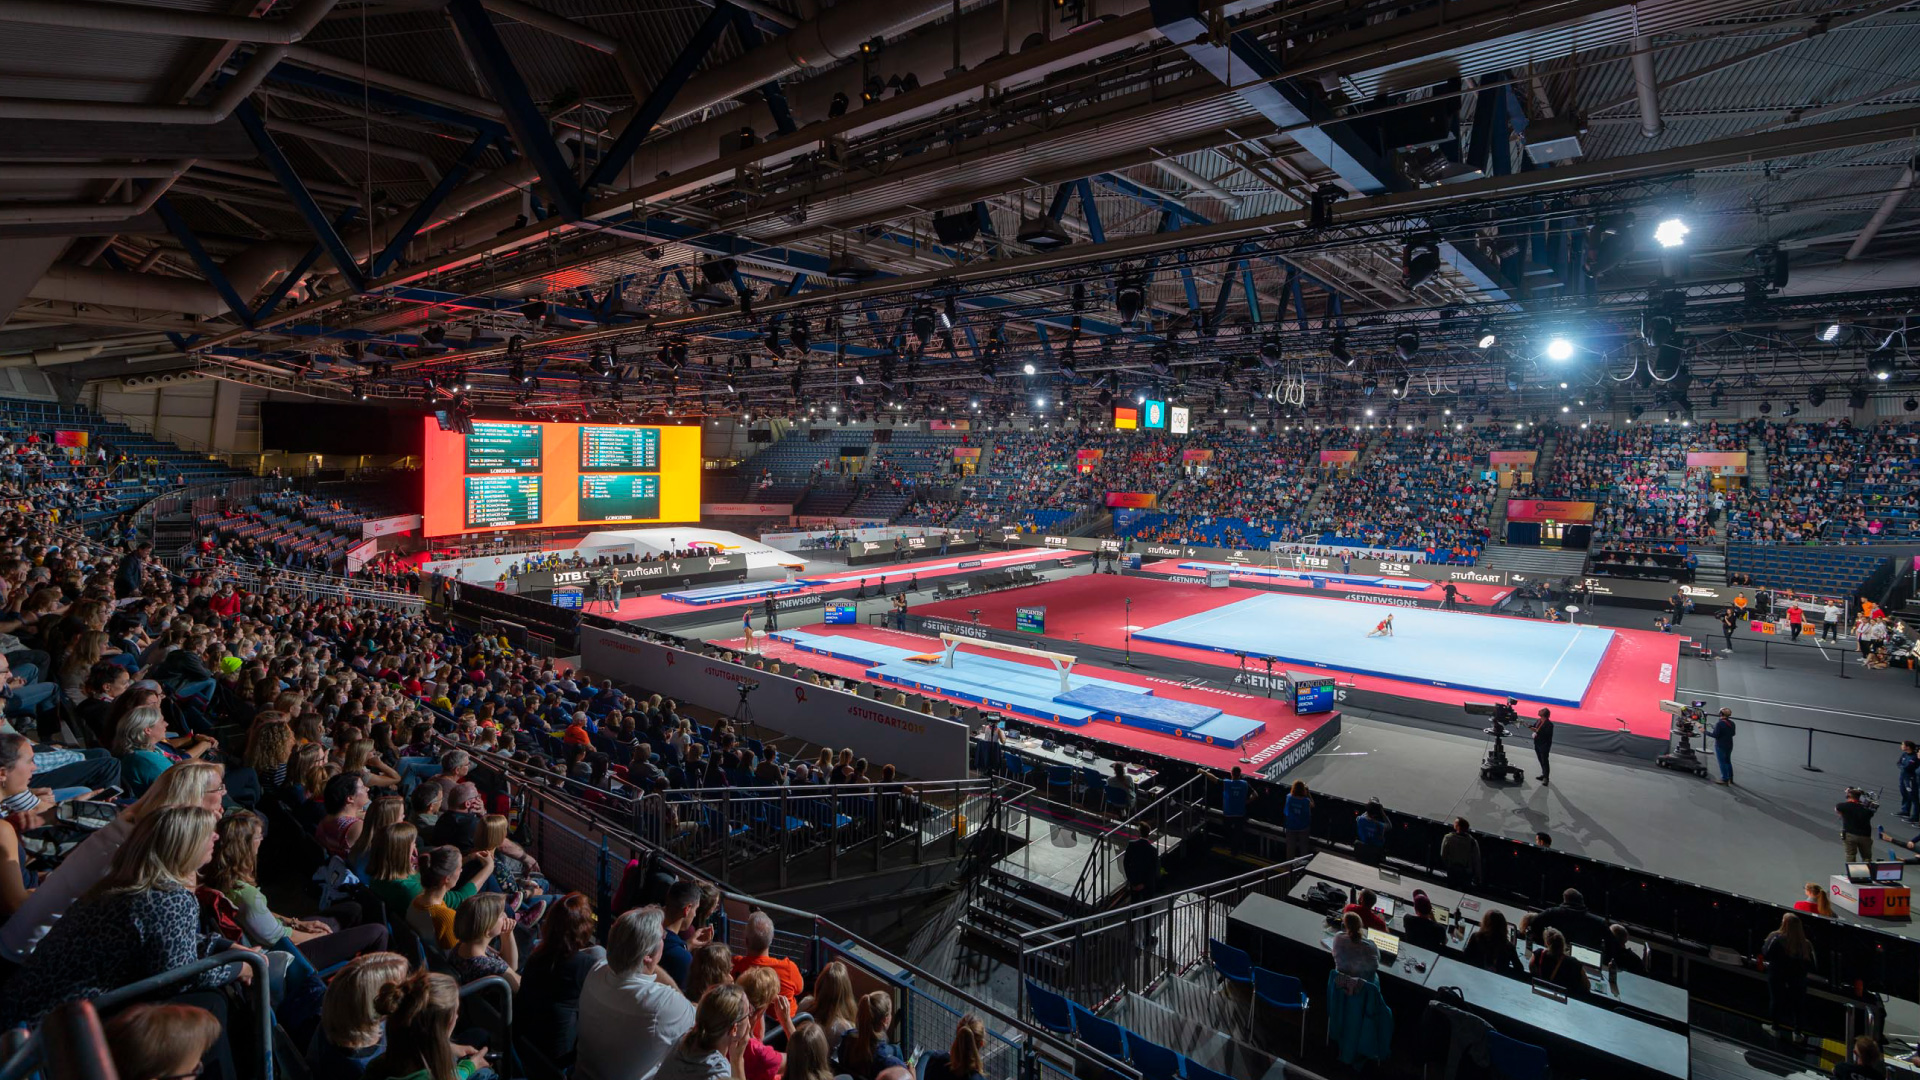 PRG delivers Lighting, Sound, Rigging, Video and LED Screen for the Athletic Gymnastics World Championship 2019 in Stuttgart.